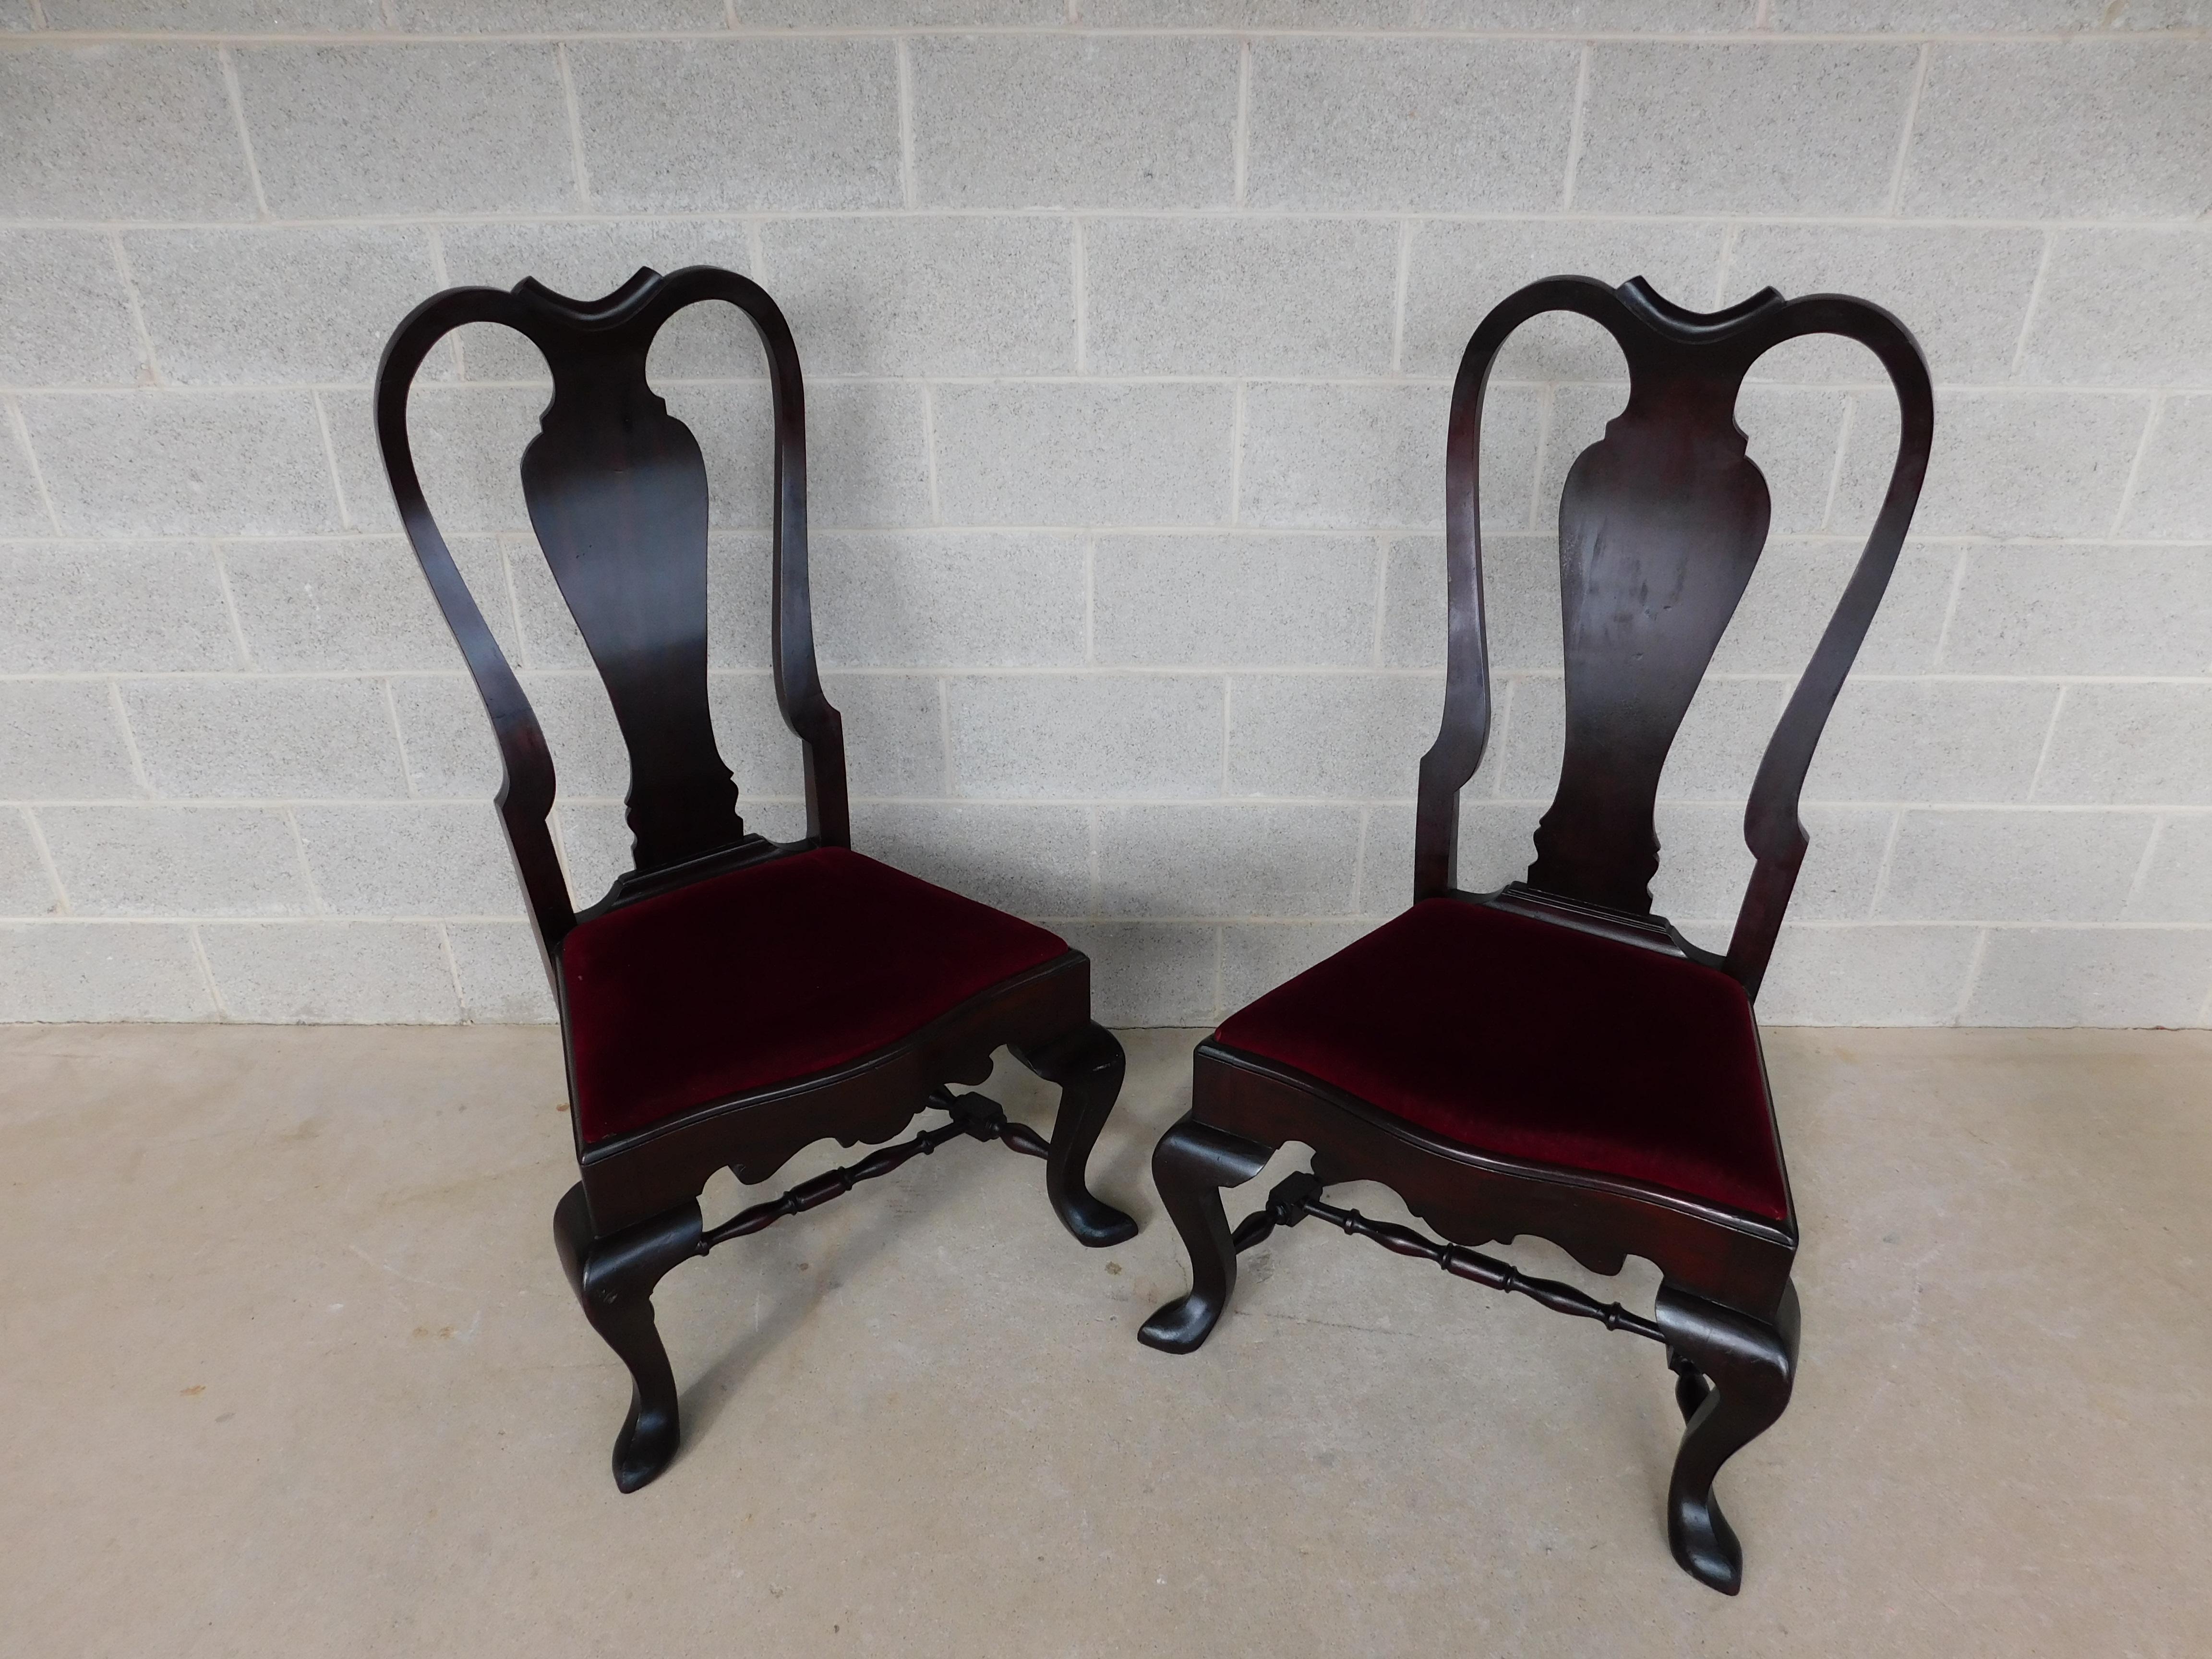 Feldenkreis Mahogany Queen Anne Style Oversize Accent Fireside Chairs - a Pair For Sale 14